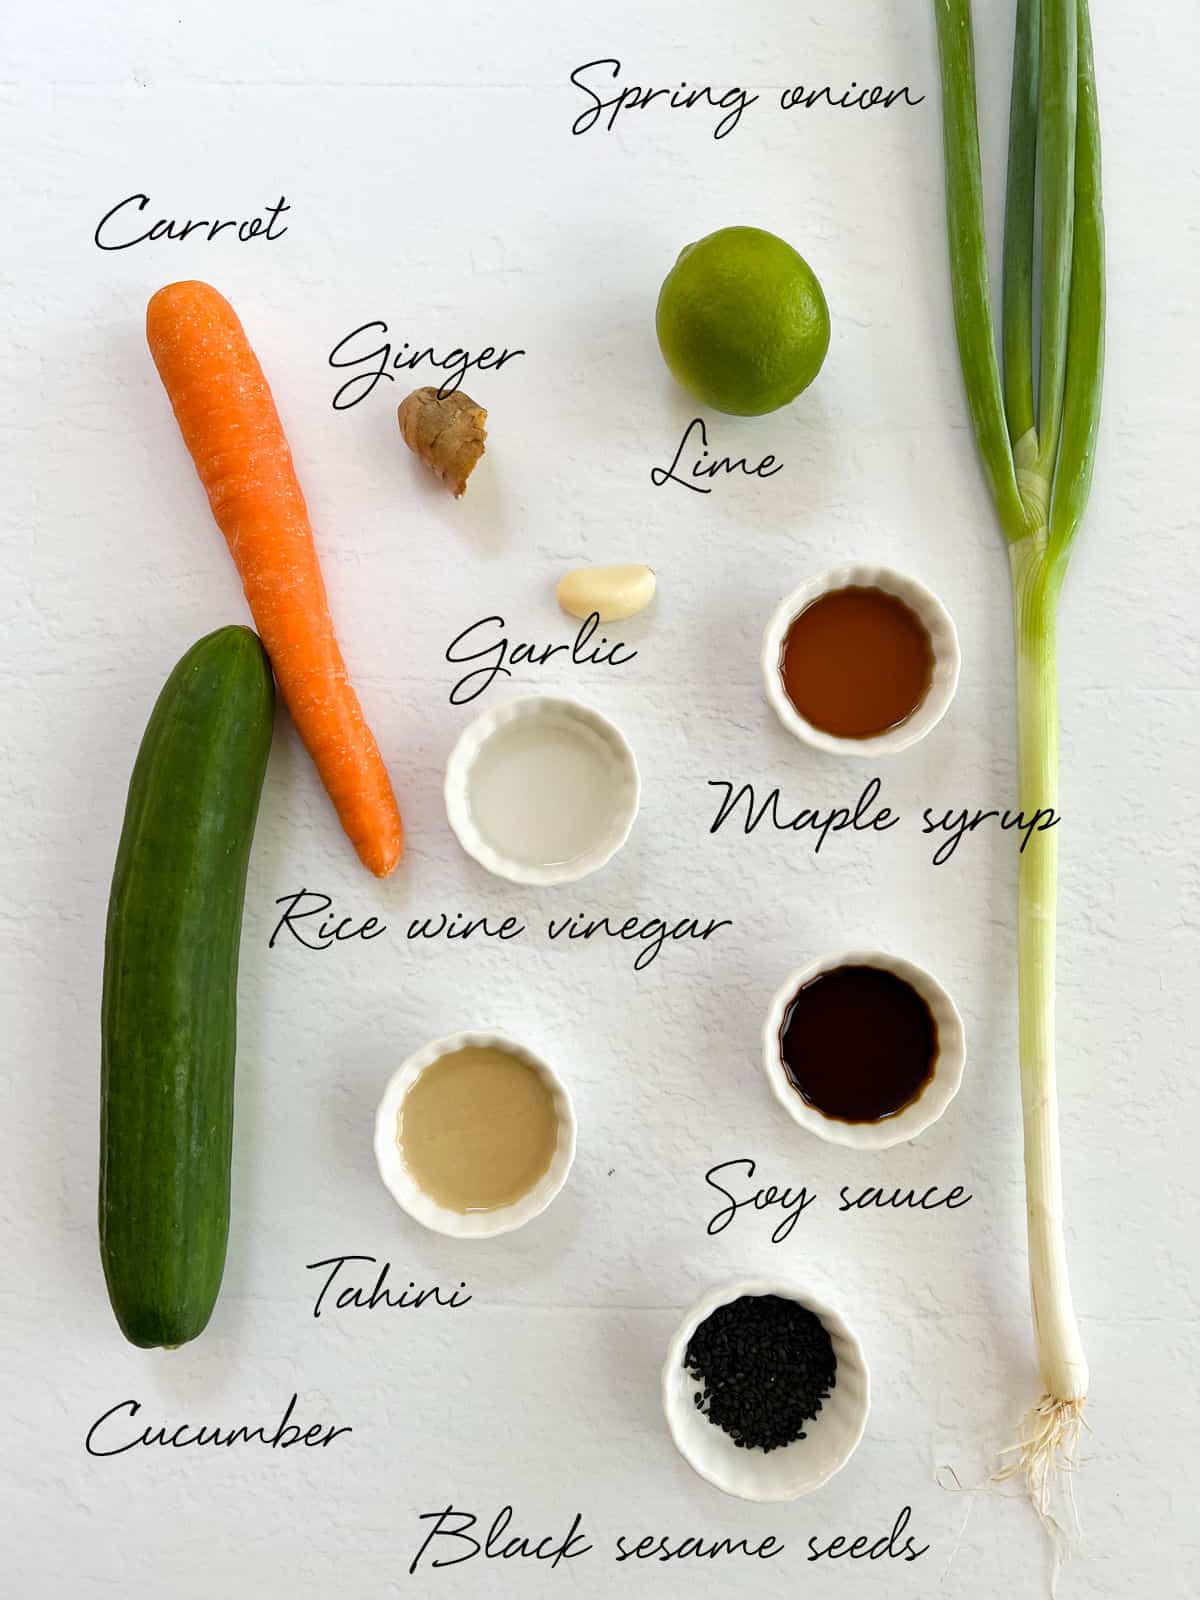 srping onion, carrot, cucumber, lime, ginger, garlic, tahini and sauces in white bowls on a white bench